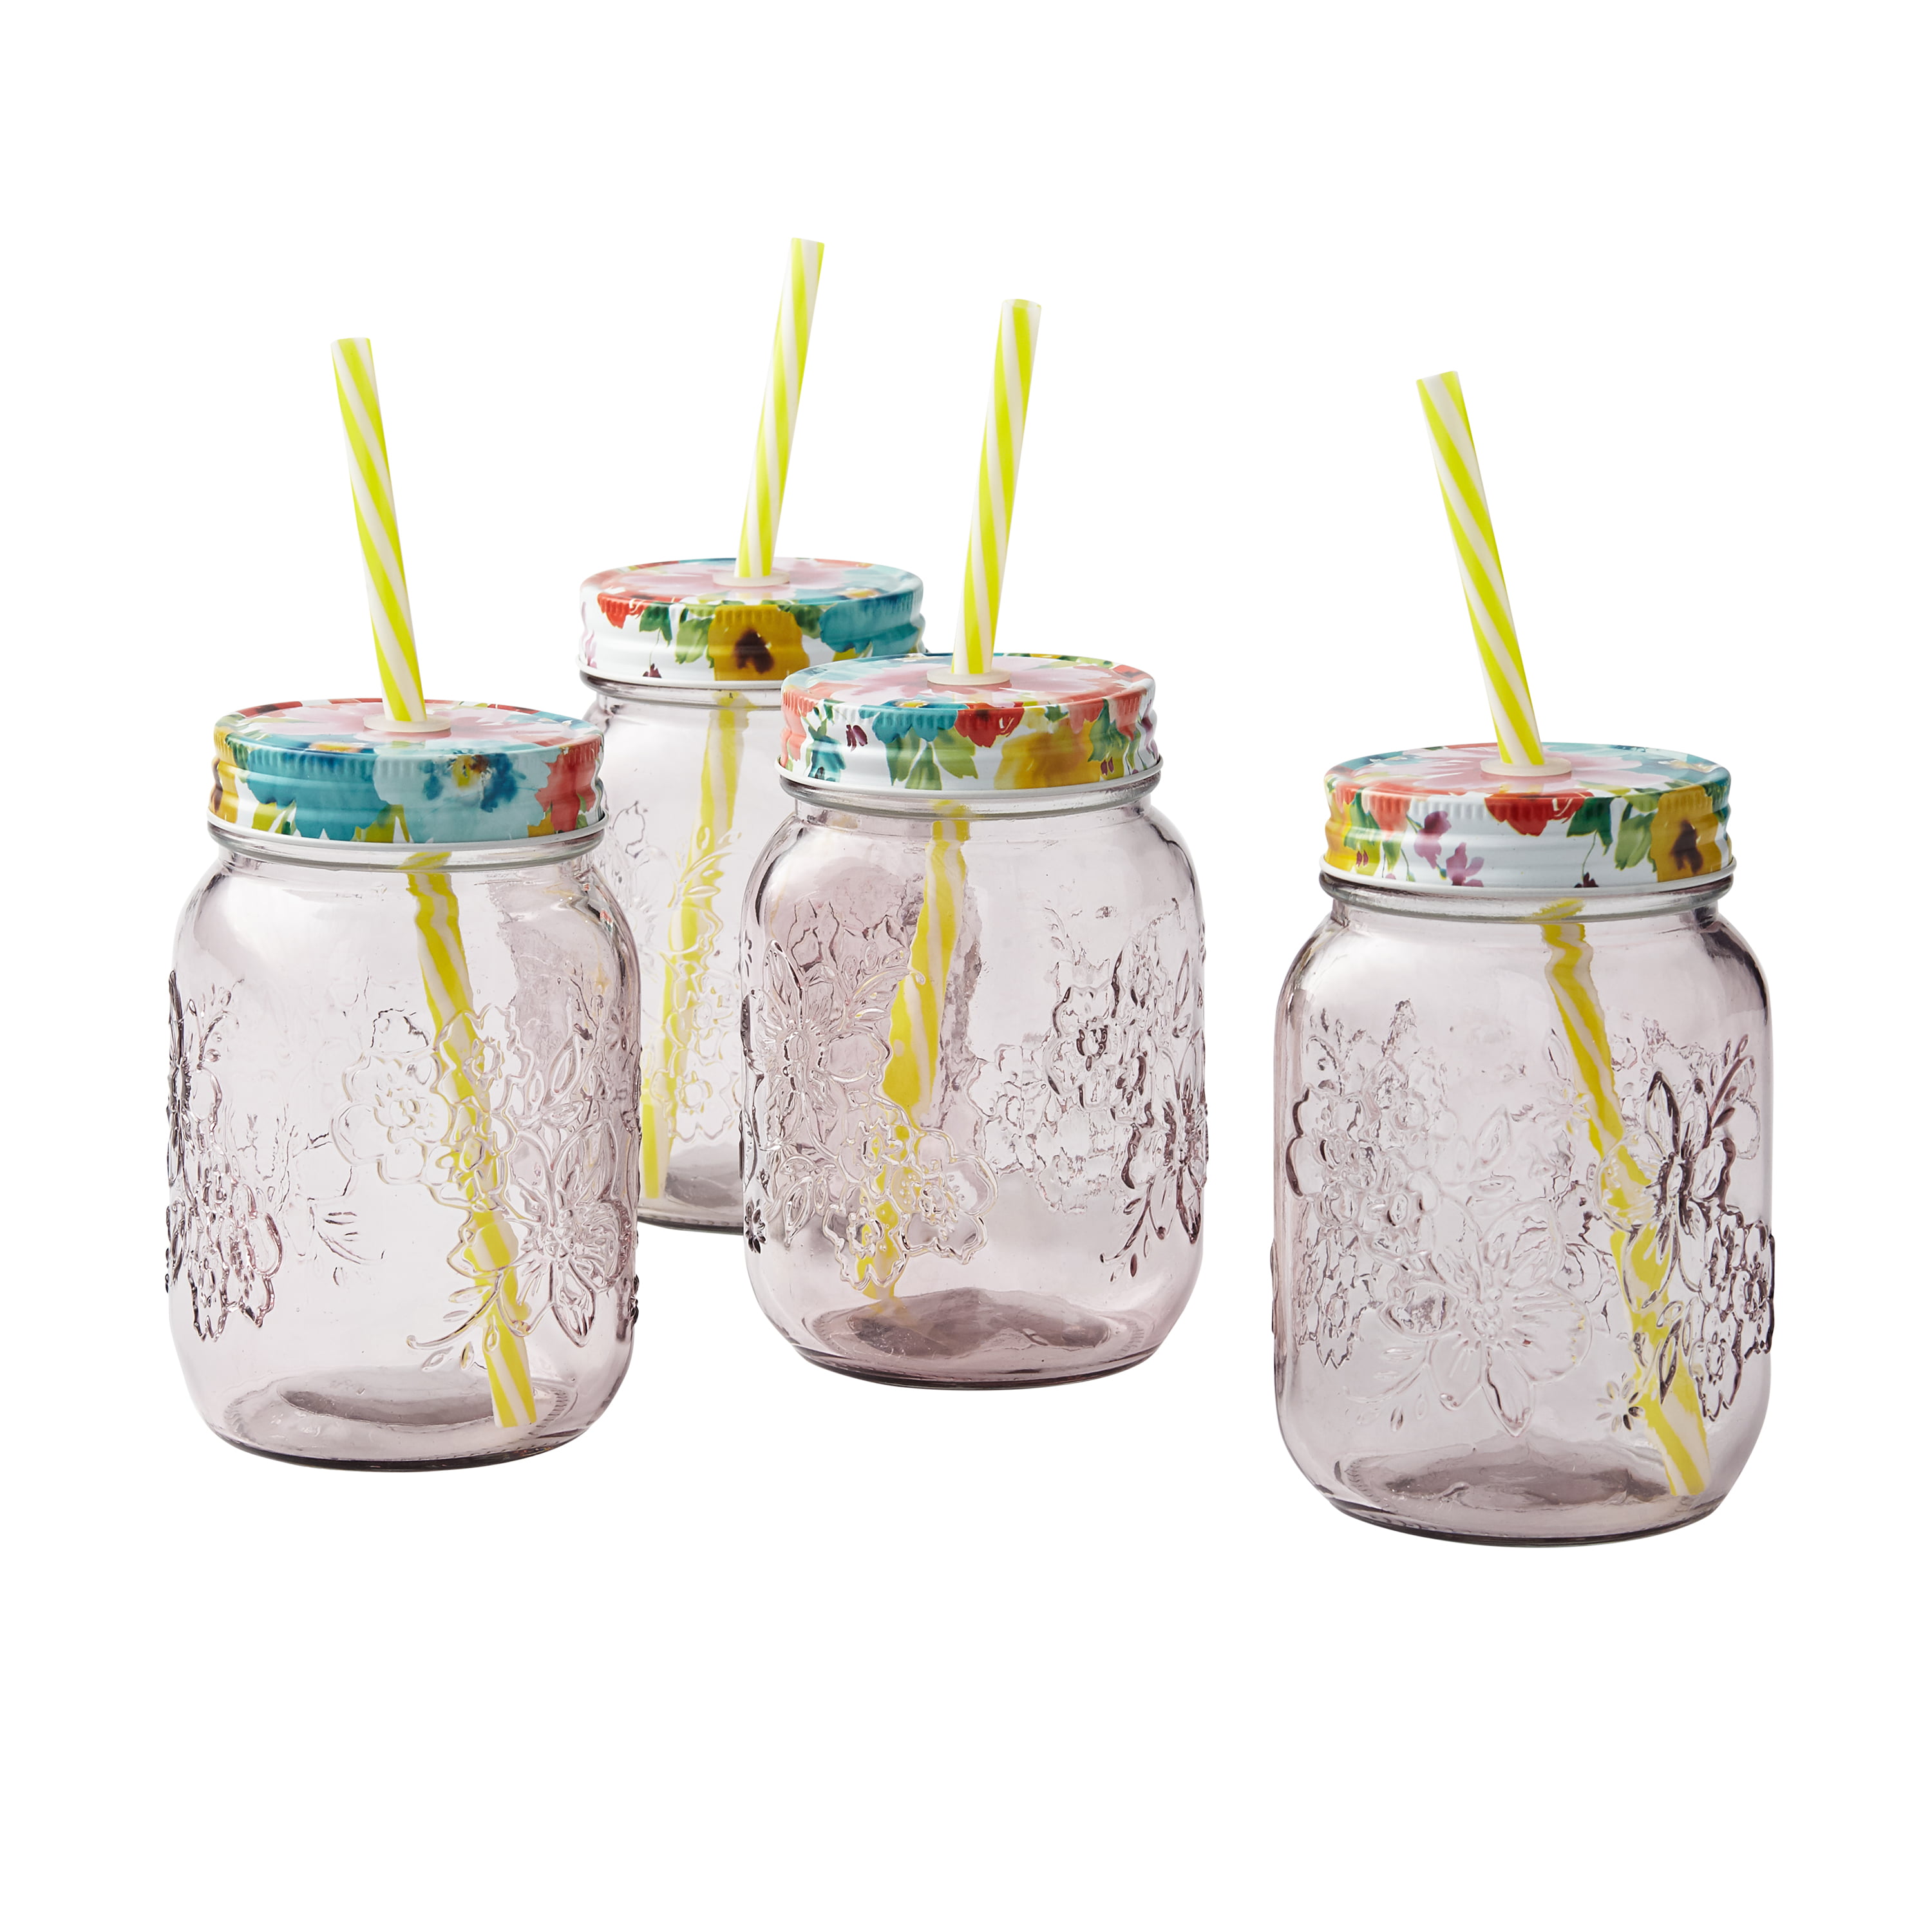 4 Pioneer Woman Rose Mason Jar 16oz Glasses with Lids and Straws